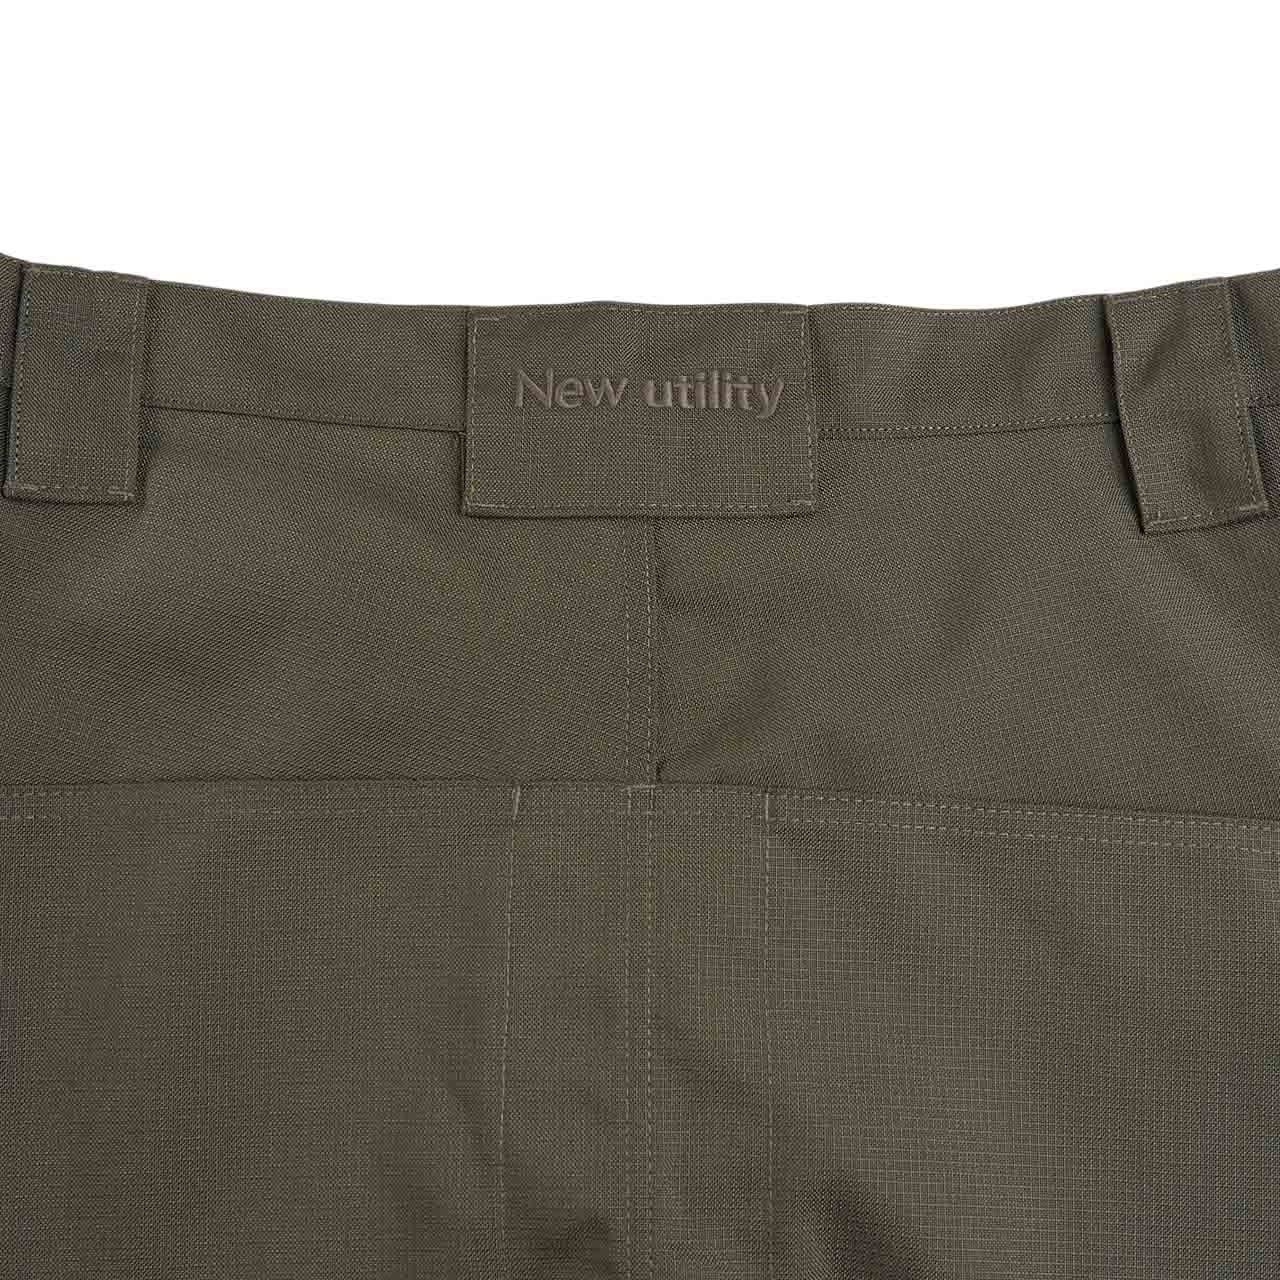 affxwrks duty pant (green ripstop) - a.plus store